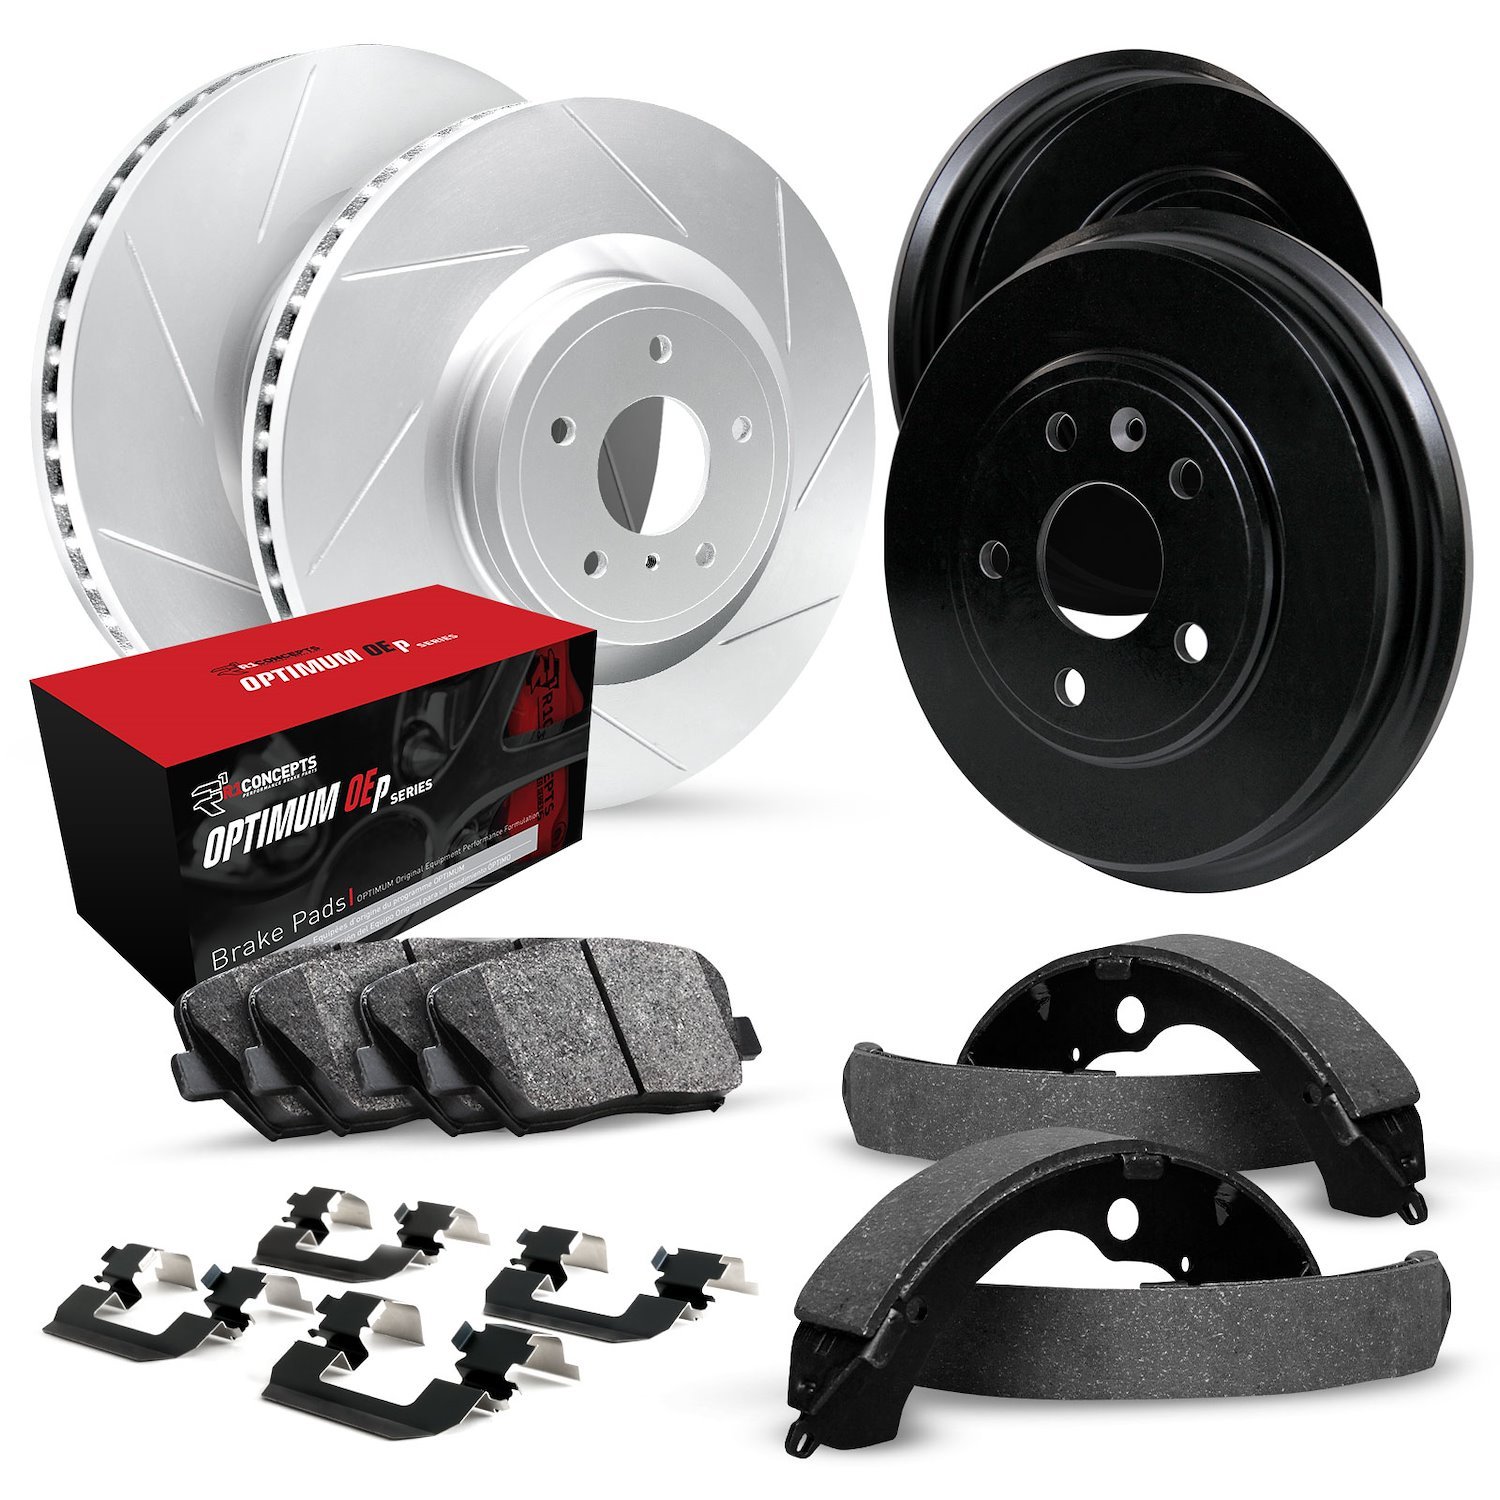 GEO-Carbon Slotted Brake Rotor & Drum Set w/Optimum OE Pads, Shoes, & Hardware, 1976-1978 GM, Position: Front & Rear